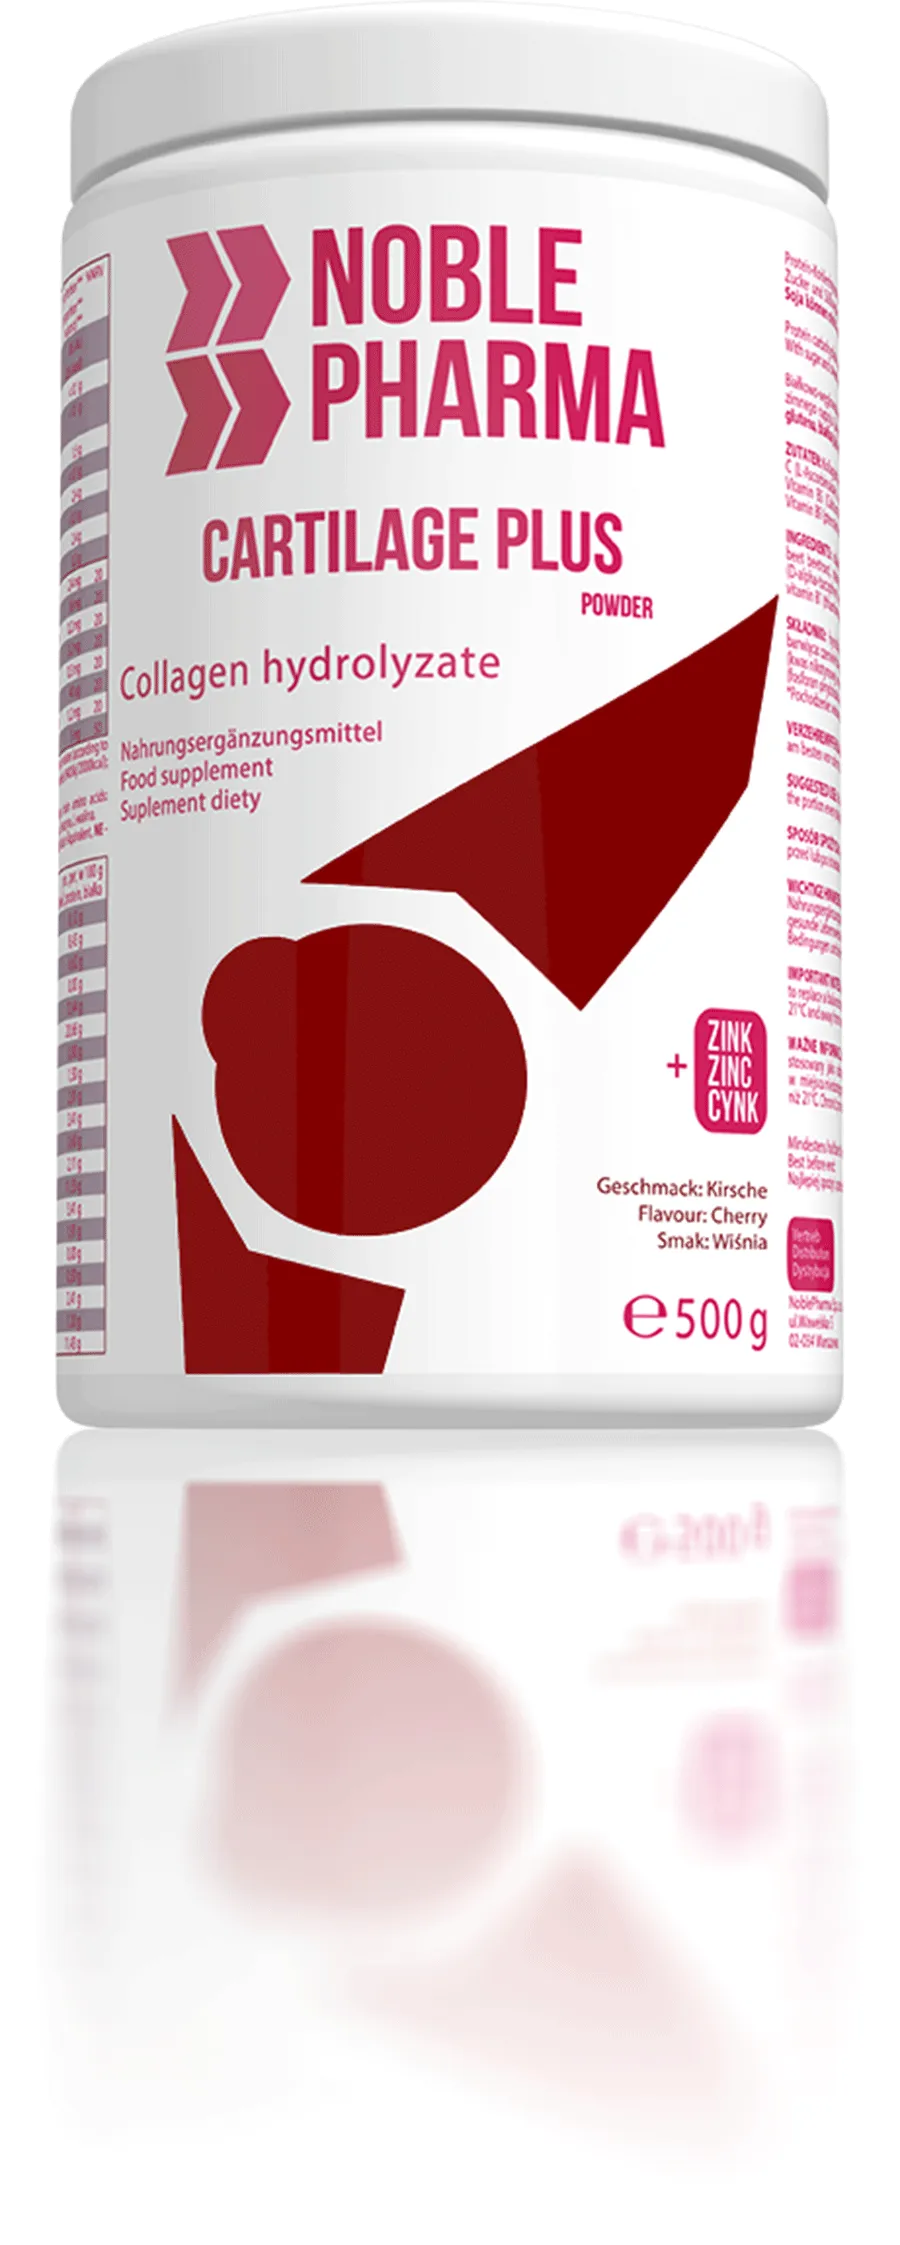 Cartilage Plus Wiśnia, suplement diety, 500 g